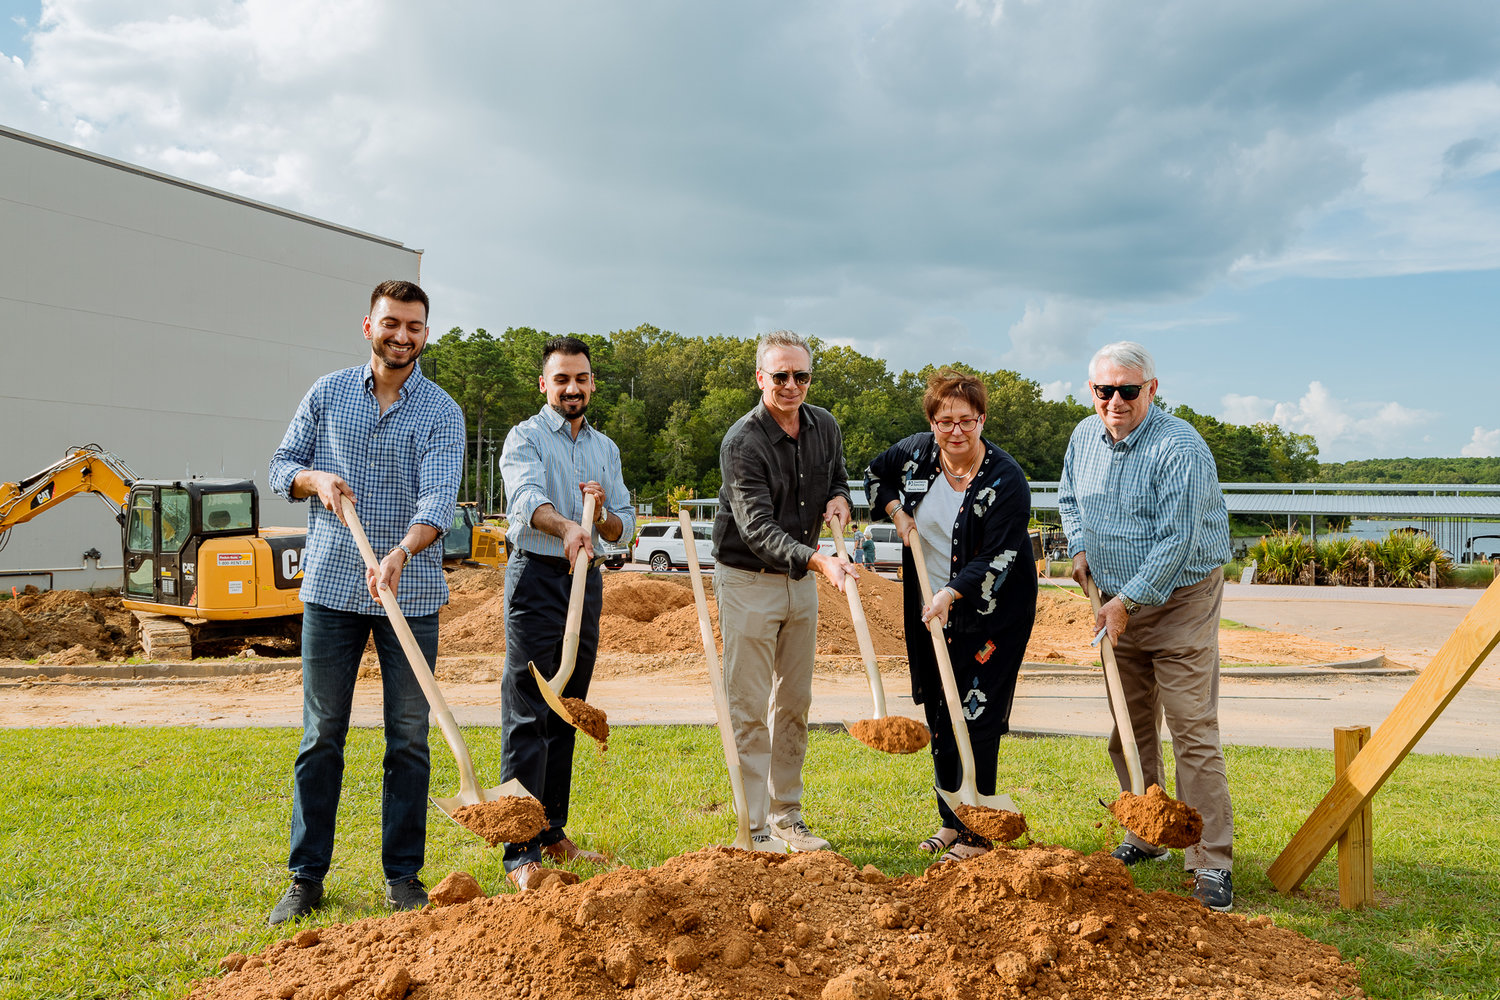 Members of the 145 Republic Street Condominiums project break ground to start construction on the new development at Lost Rabbit. Pictured, from left: Harmon Singh, RJ Singh, Todd Everett, Rhonda Newell, and Sam Everett.